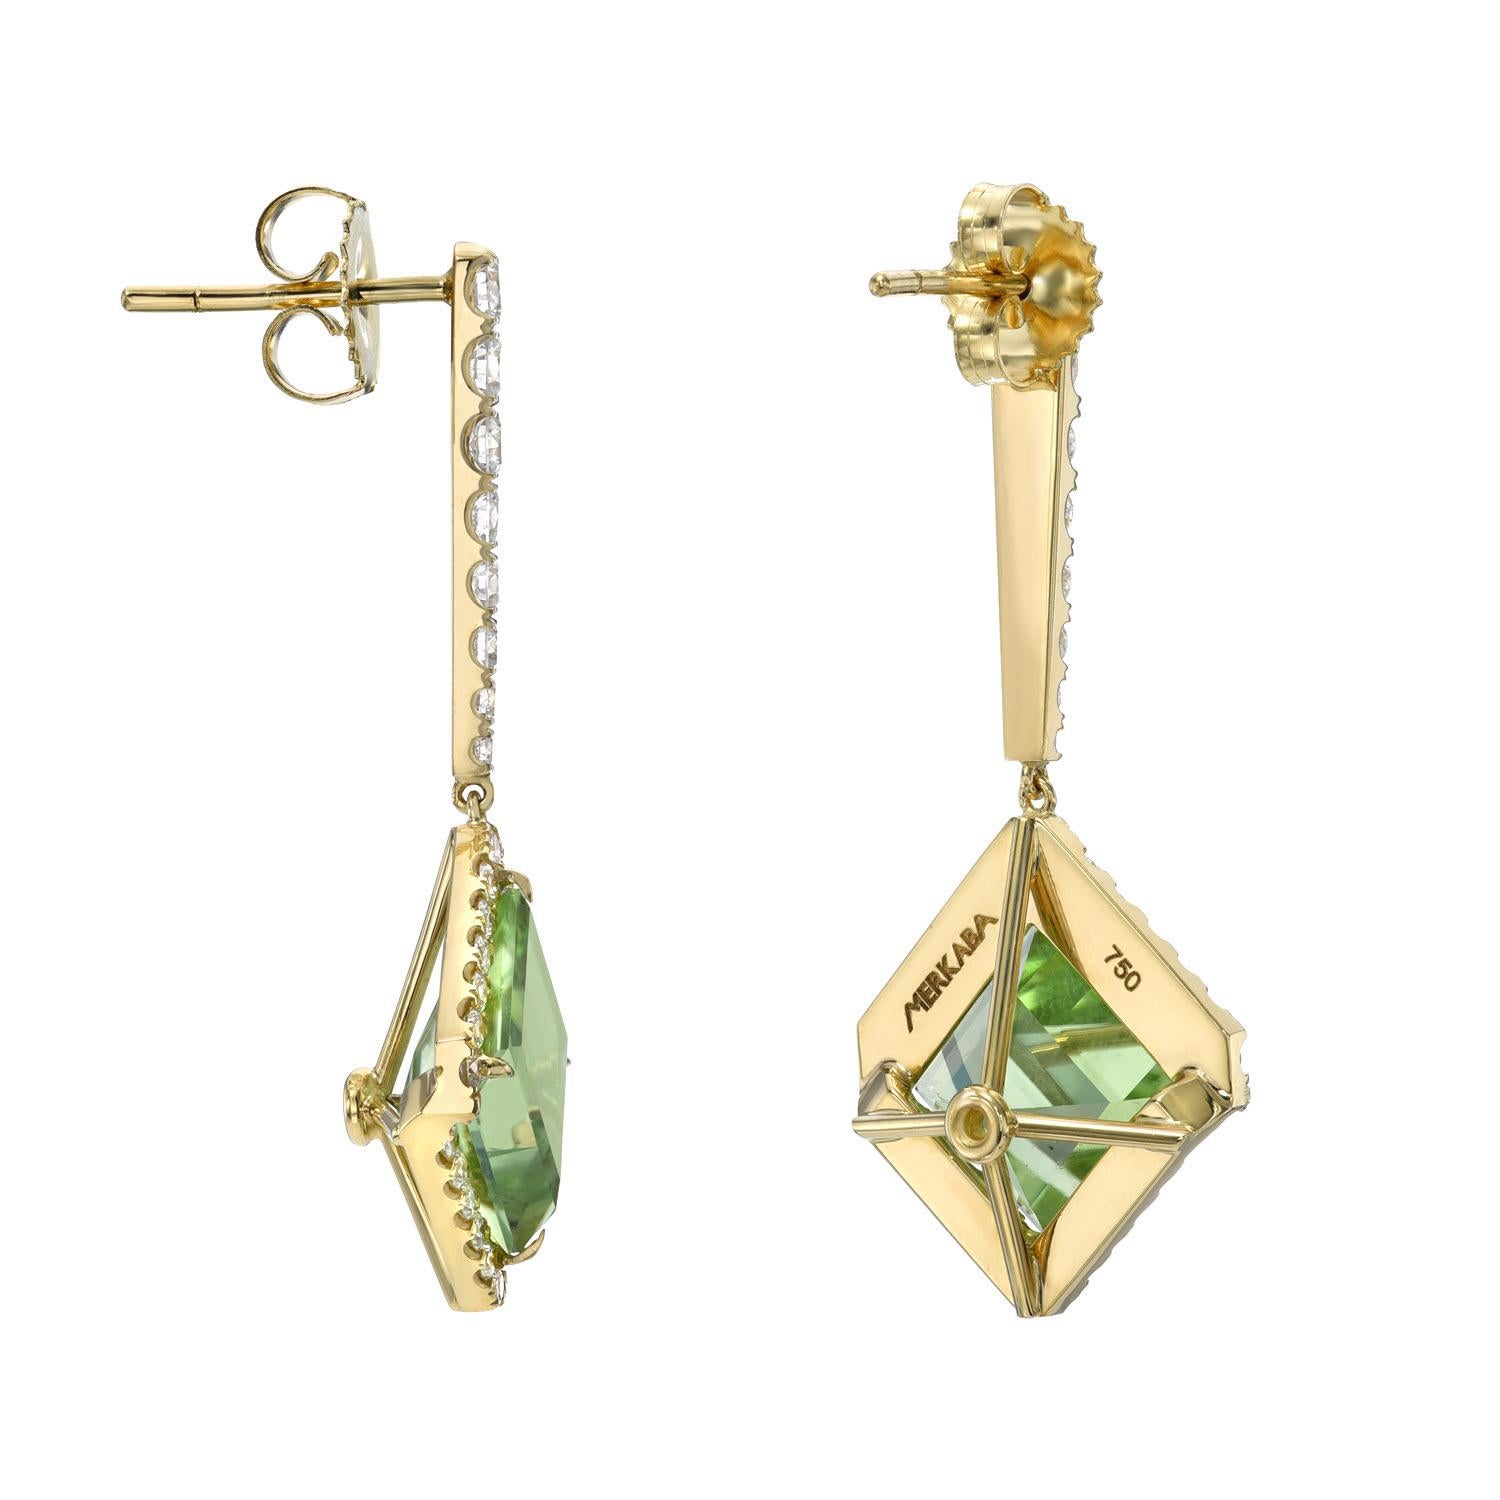 Contemporary Peridot Earrings 9.37 Carat Kite Shapes For Sale